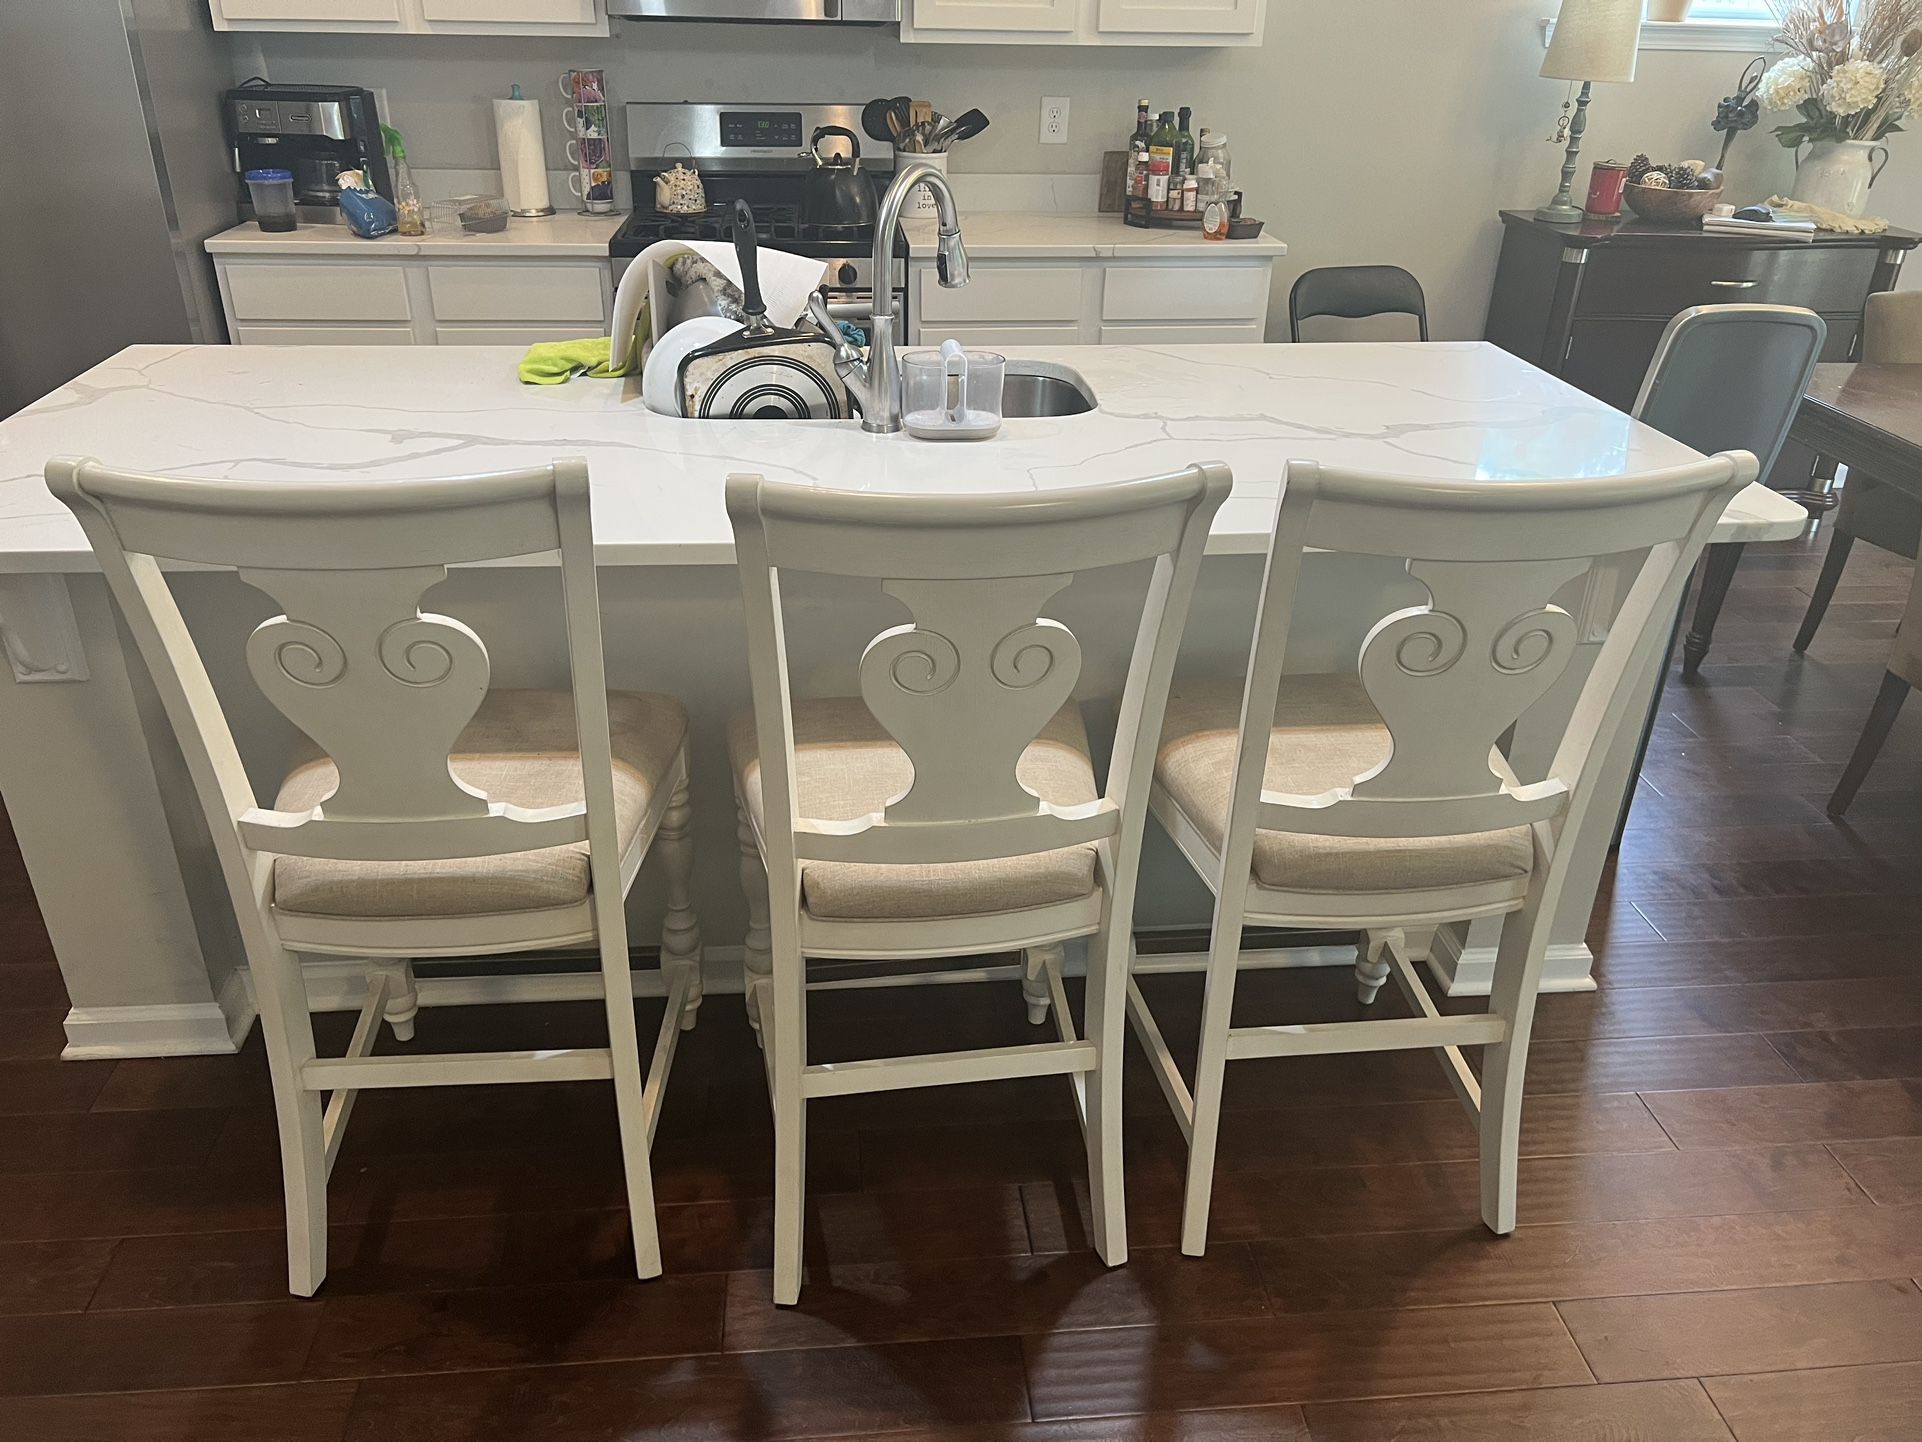 Moving Sale- 3 Great island Chairs - $80 a chair 